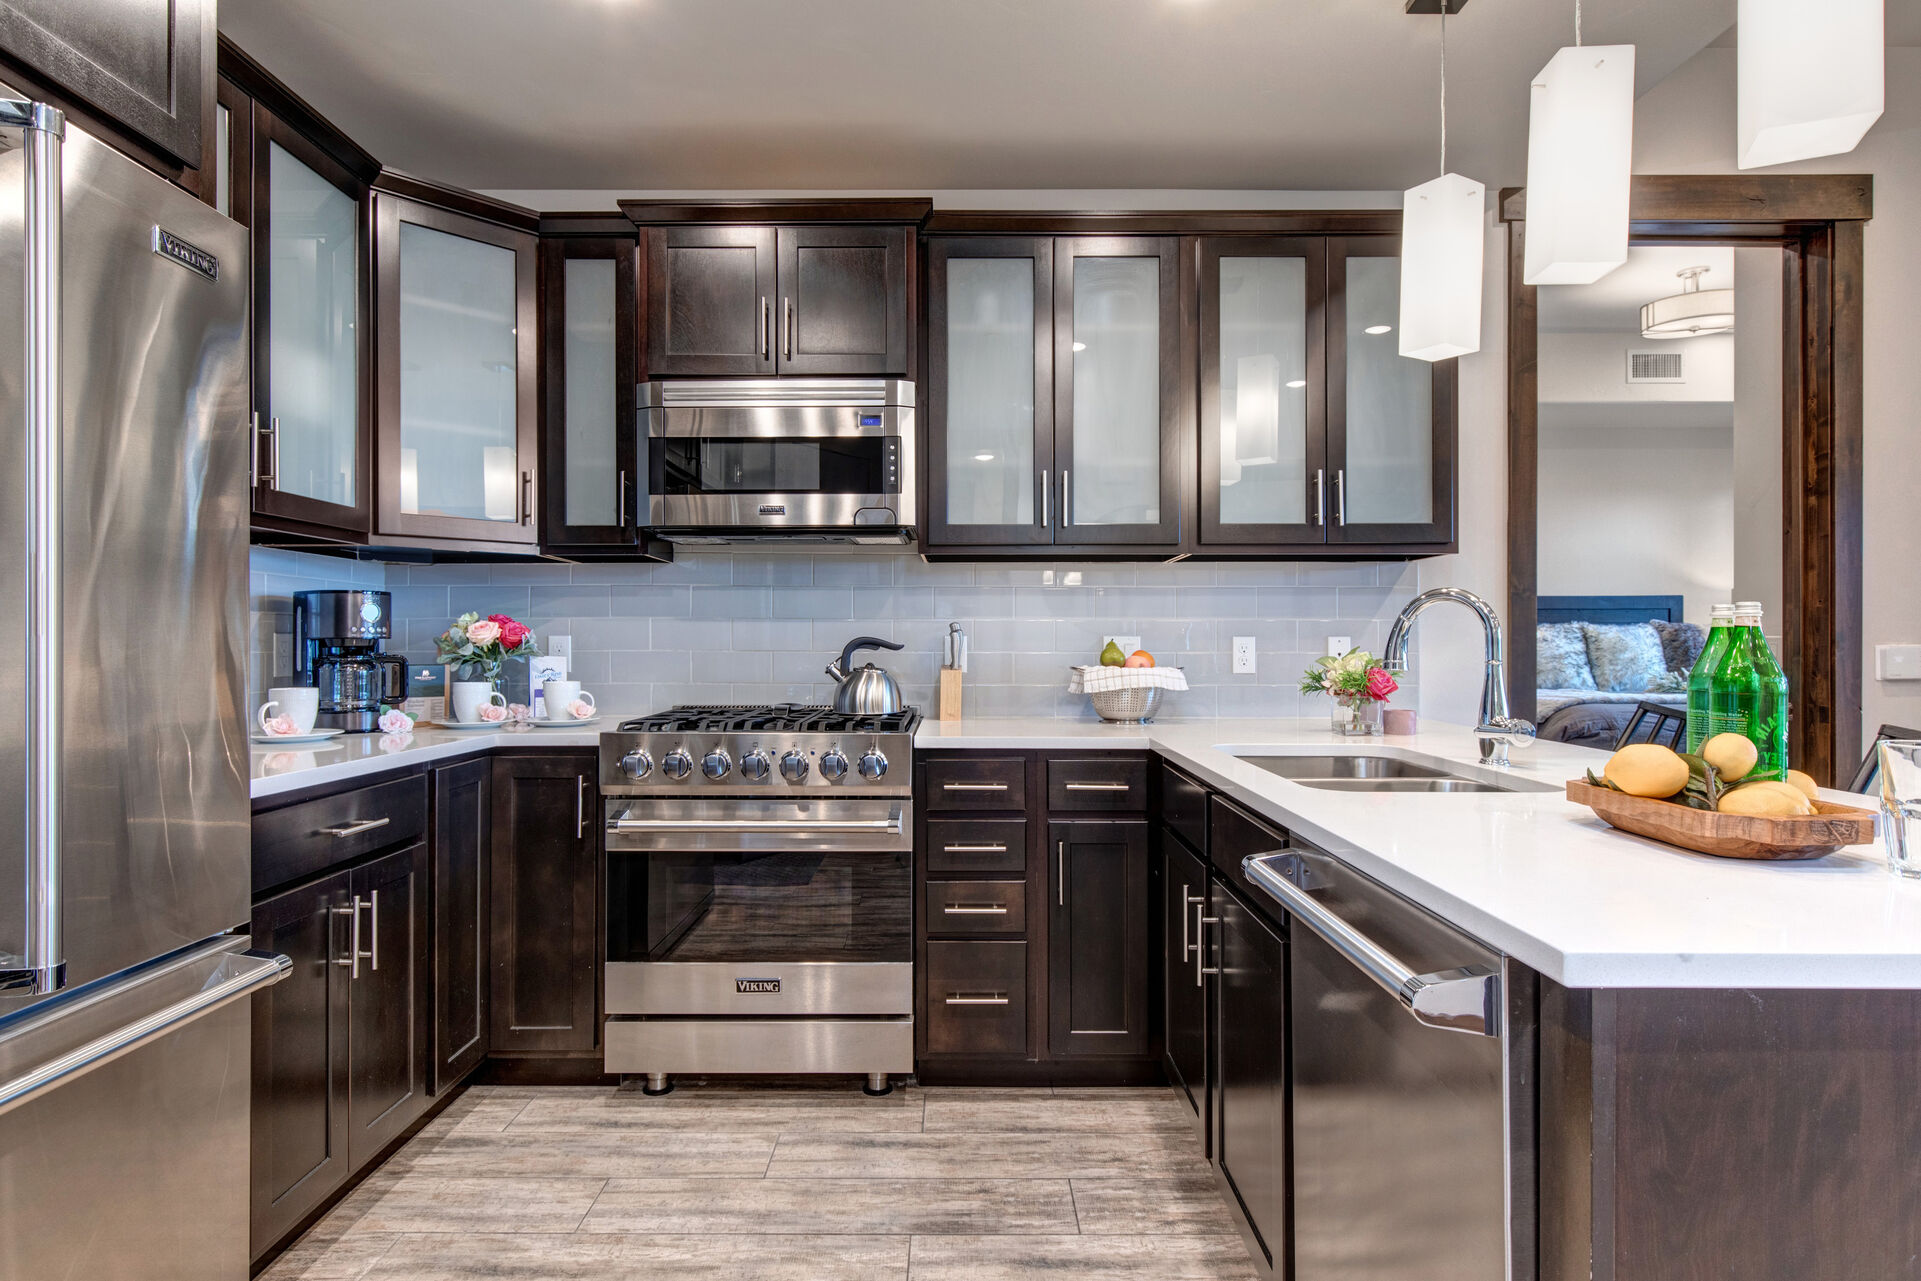 Fully equipped kitchen with gorgeous stone countertops, stainless steel Viking appliances, and bar seating for two